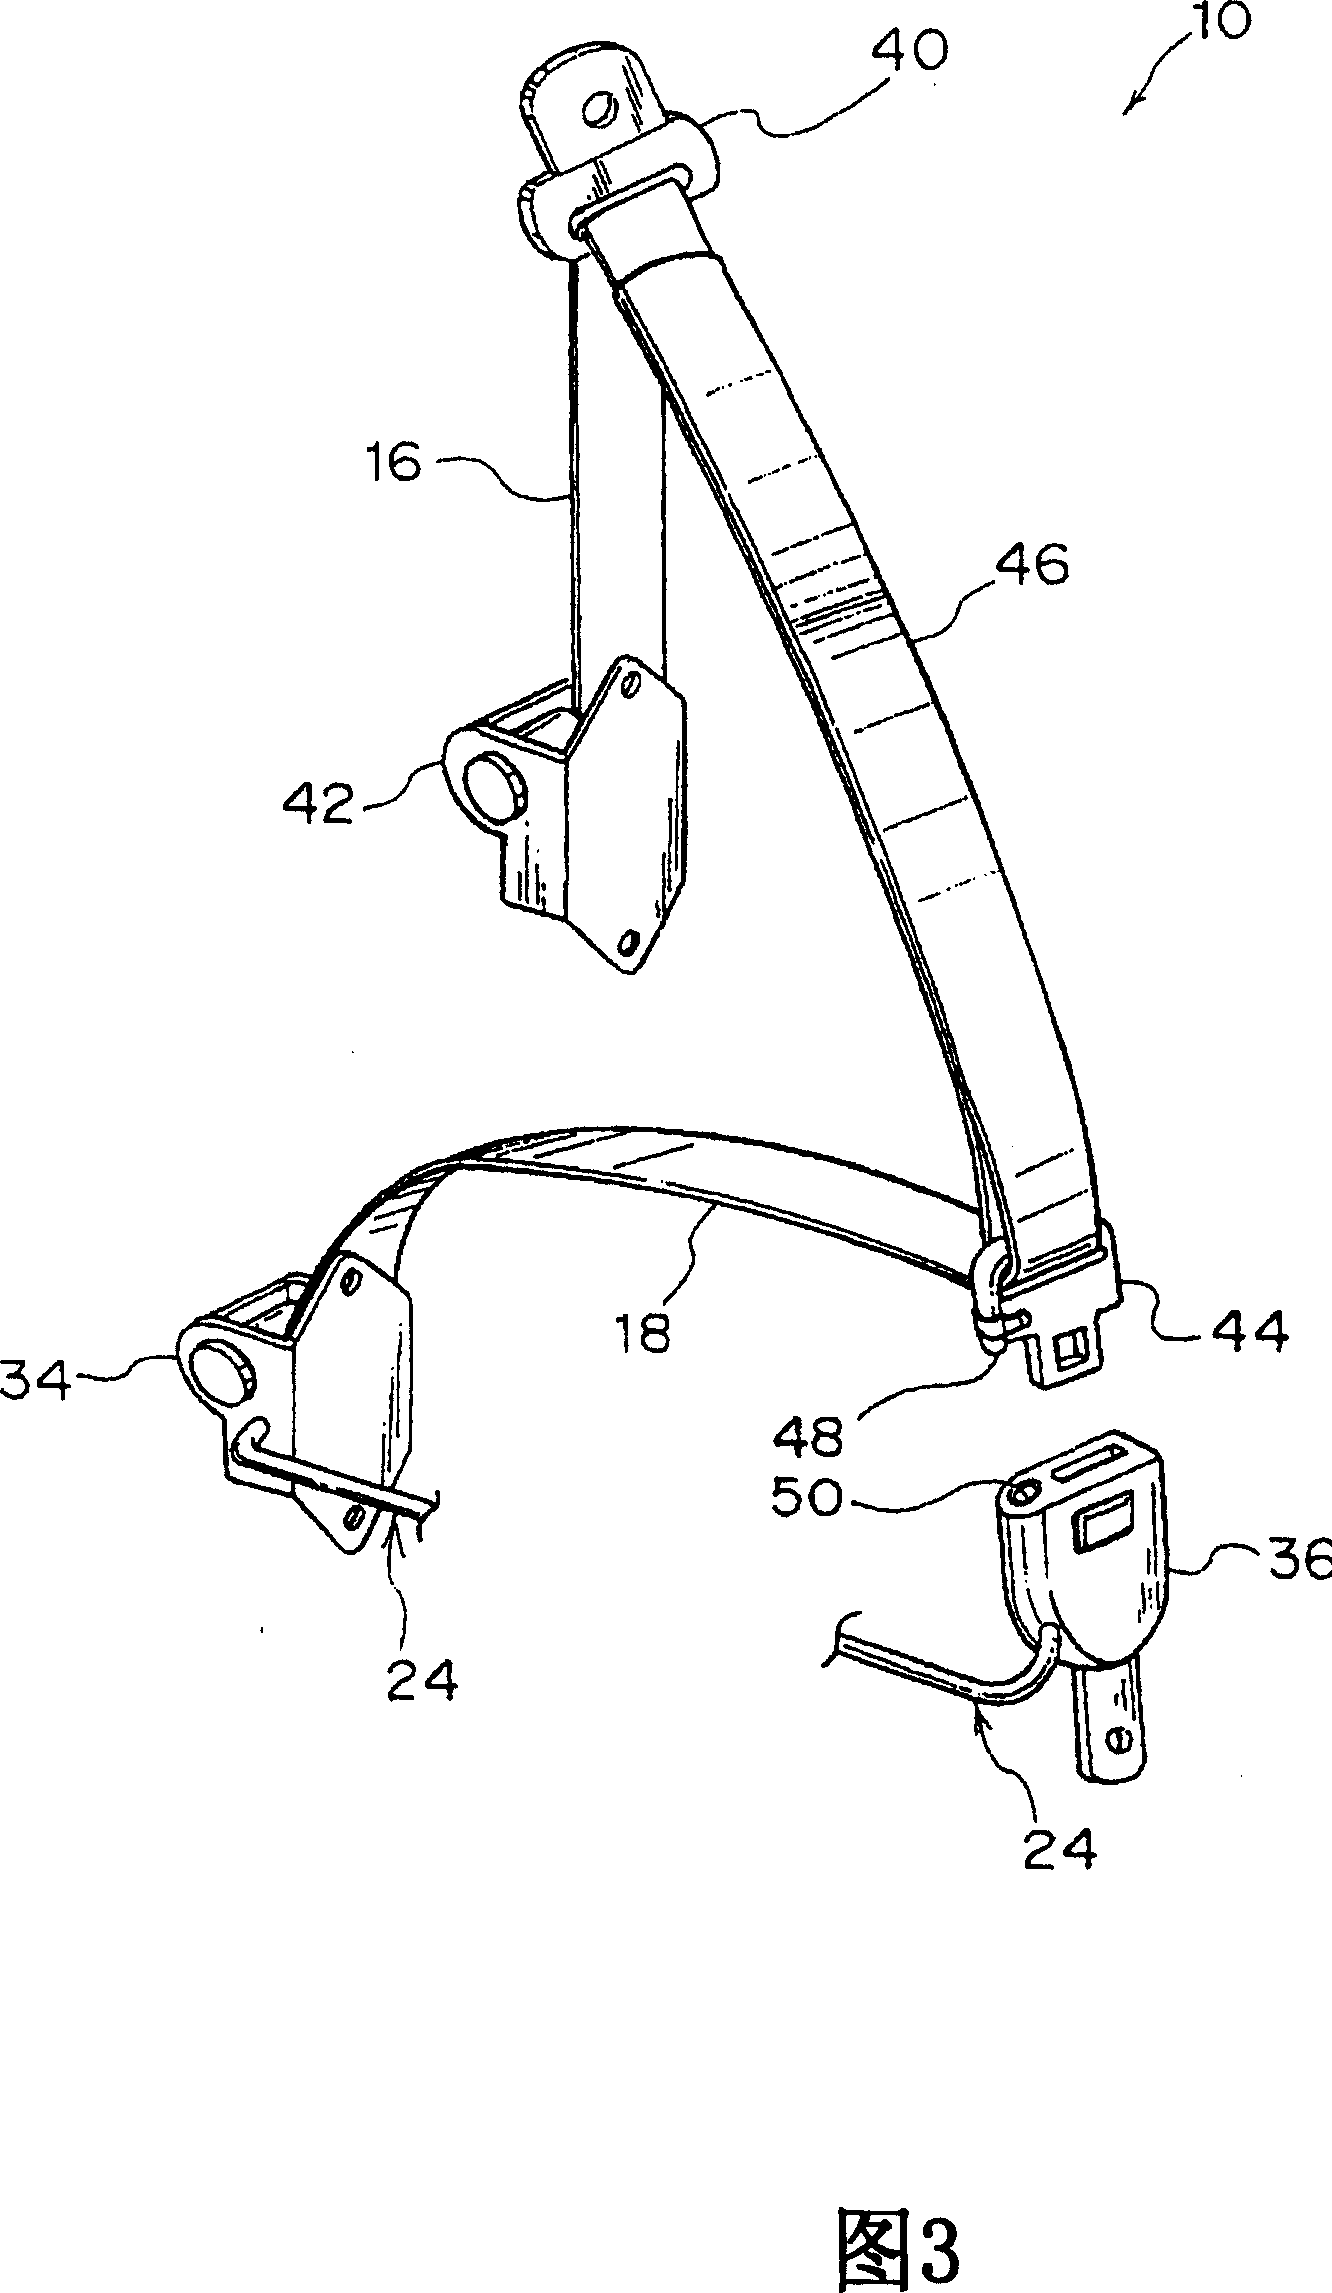 Air belt apparatus for use in a motor vehicle